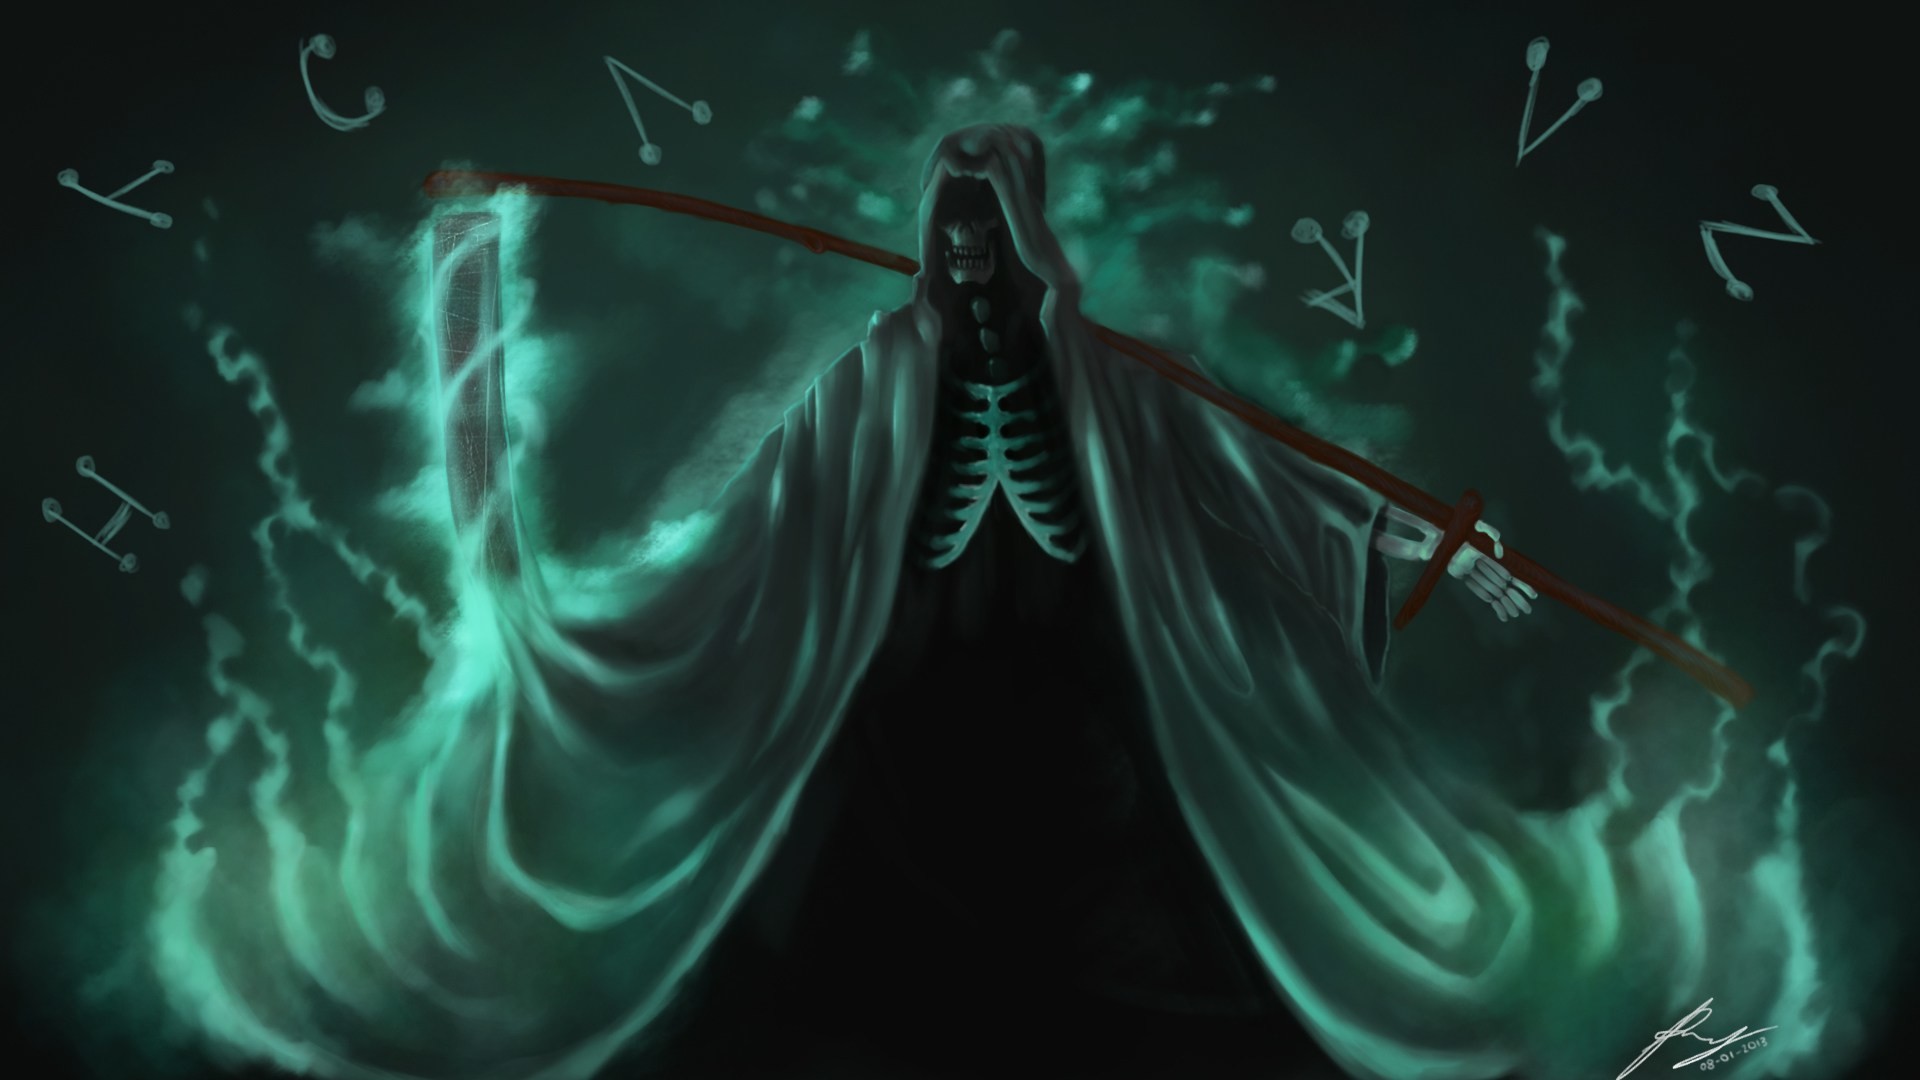 1920x1080 ... Background; Nice Anime Grim Reaper Wallpaper Free Wallpaper For Desktop  and Mobile in All Resolutions Free Download